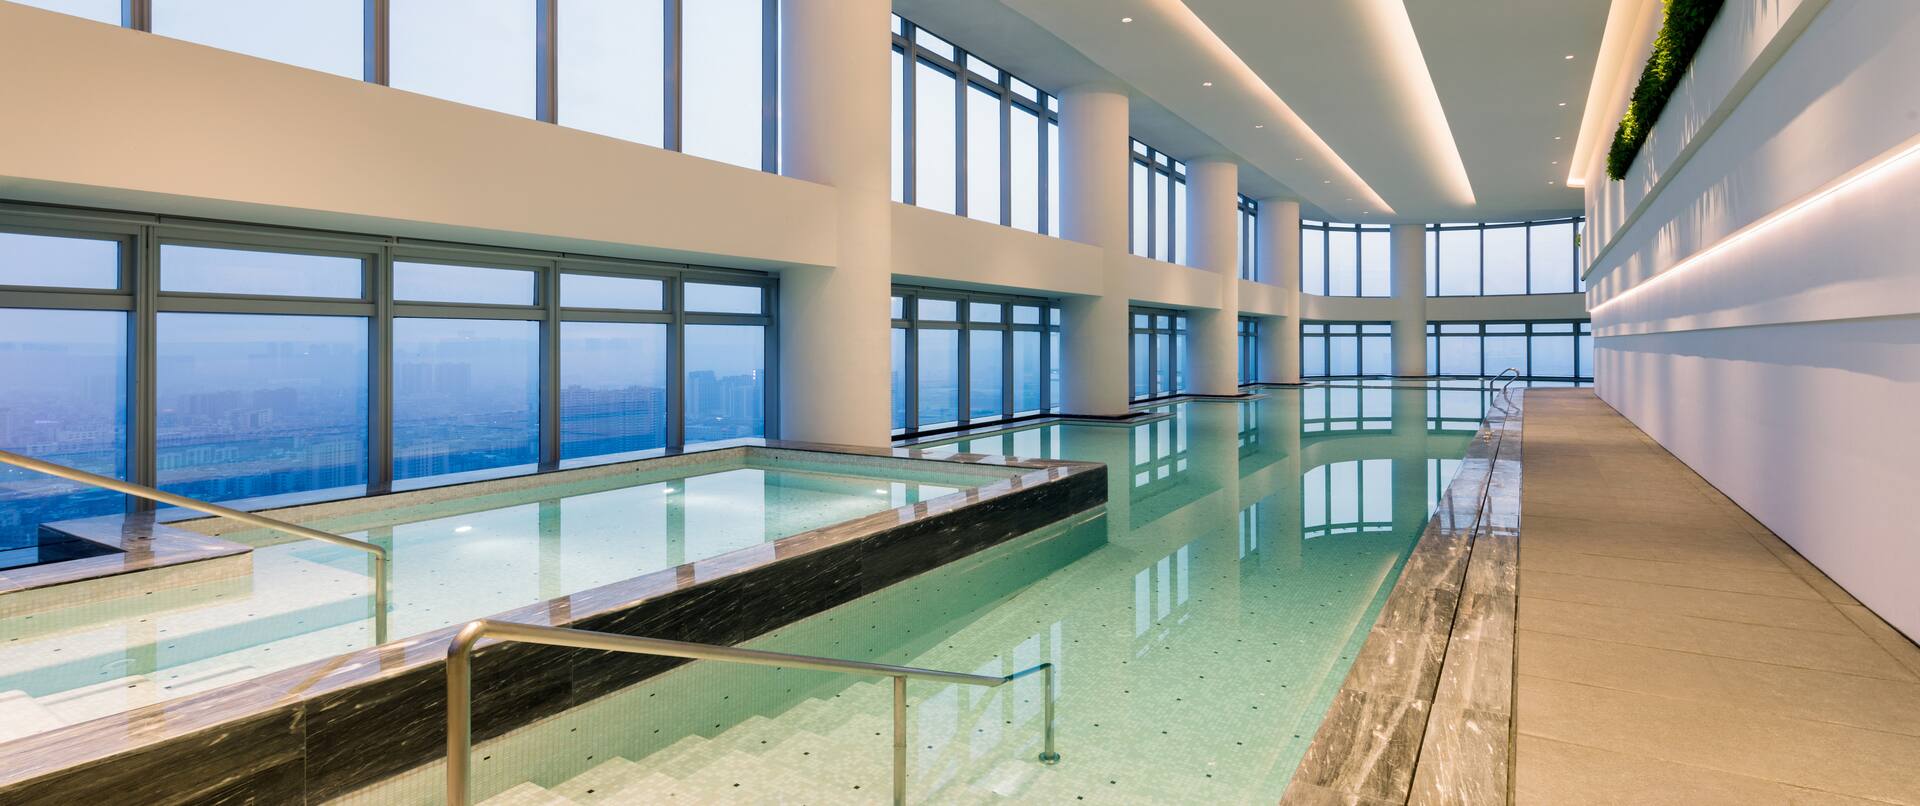 Indoor Pool Area with Large Windows Offering City View